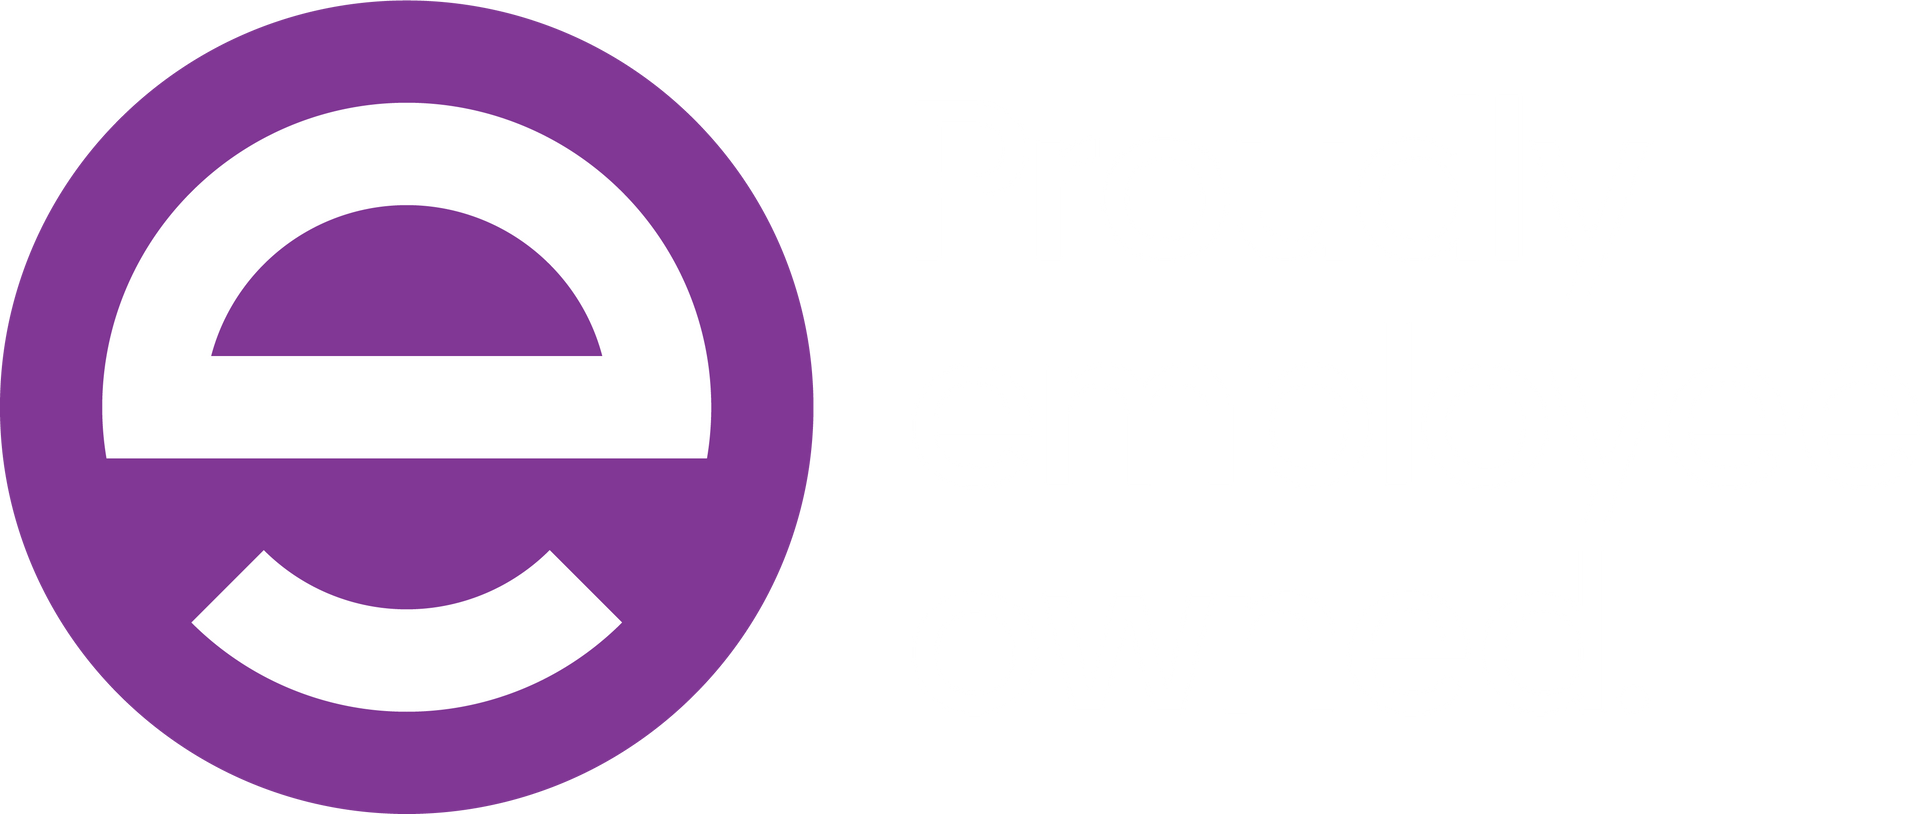 a purple circle with a white letter e inside of it